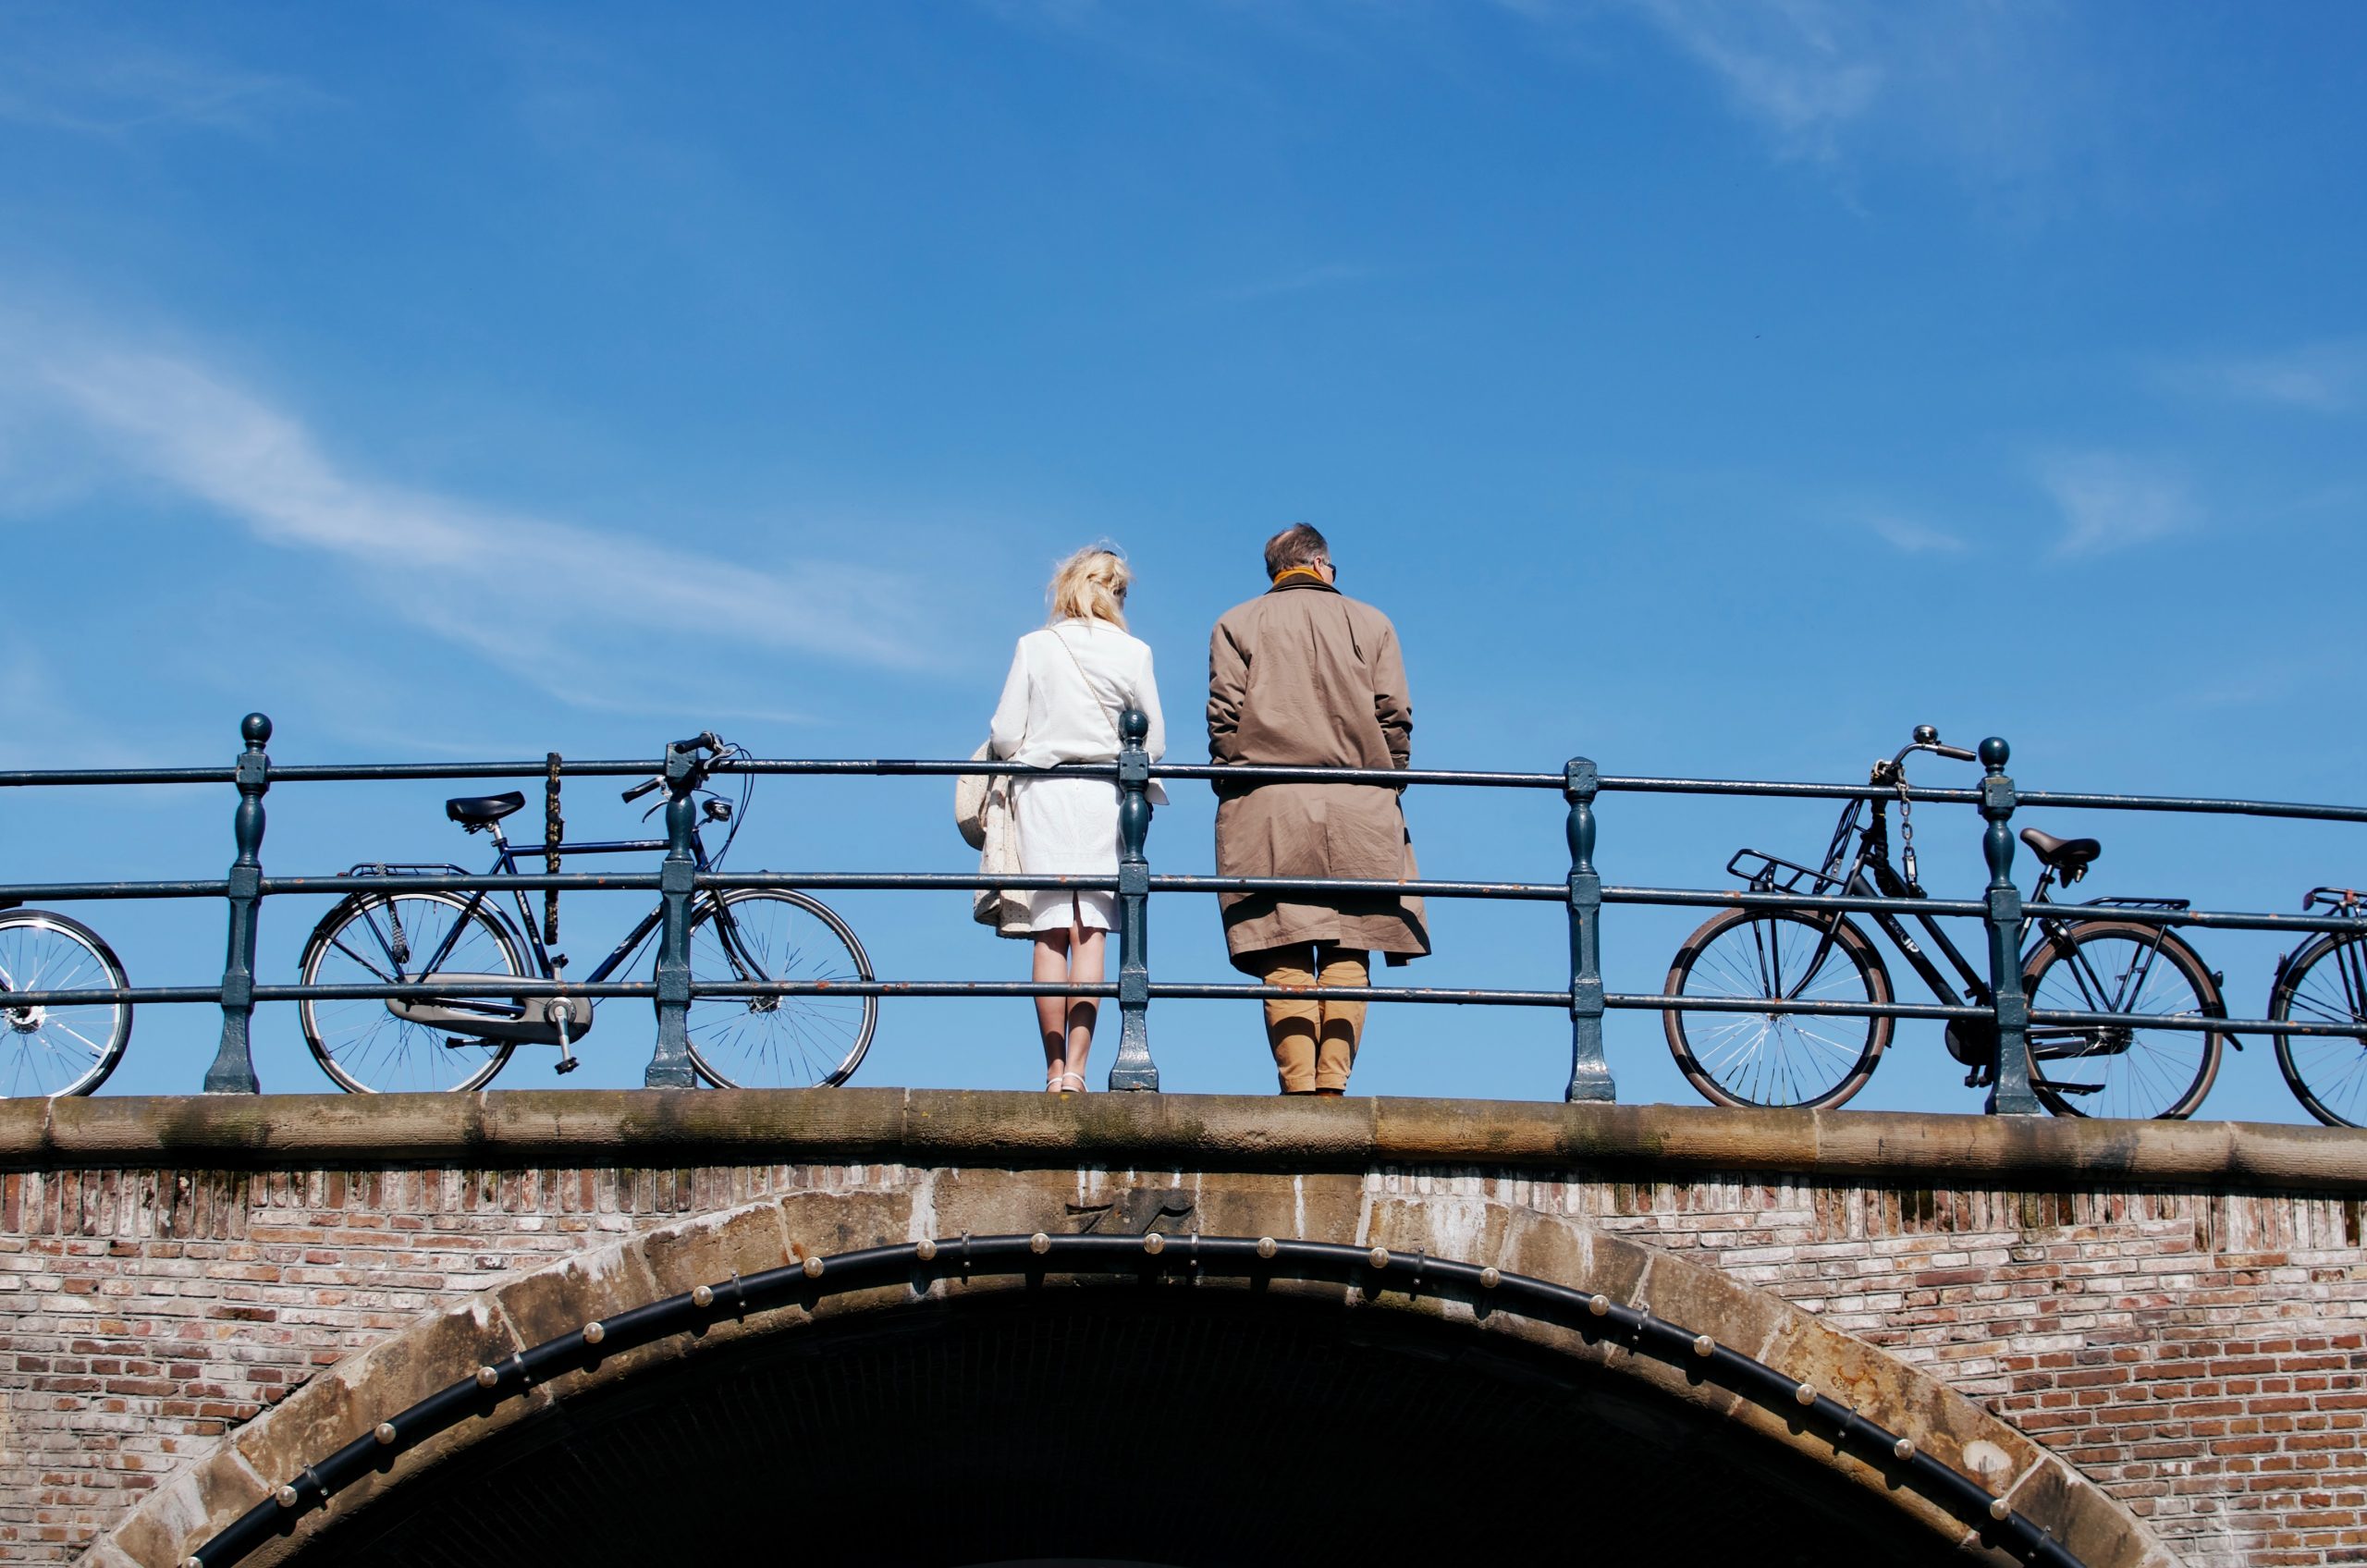 Amsterdam, a very bicycle-friendly - 10 Reasons To Visit Amsterdam 